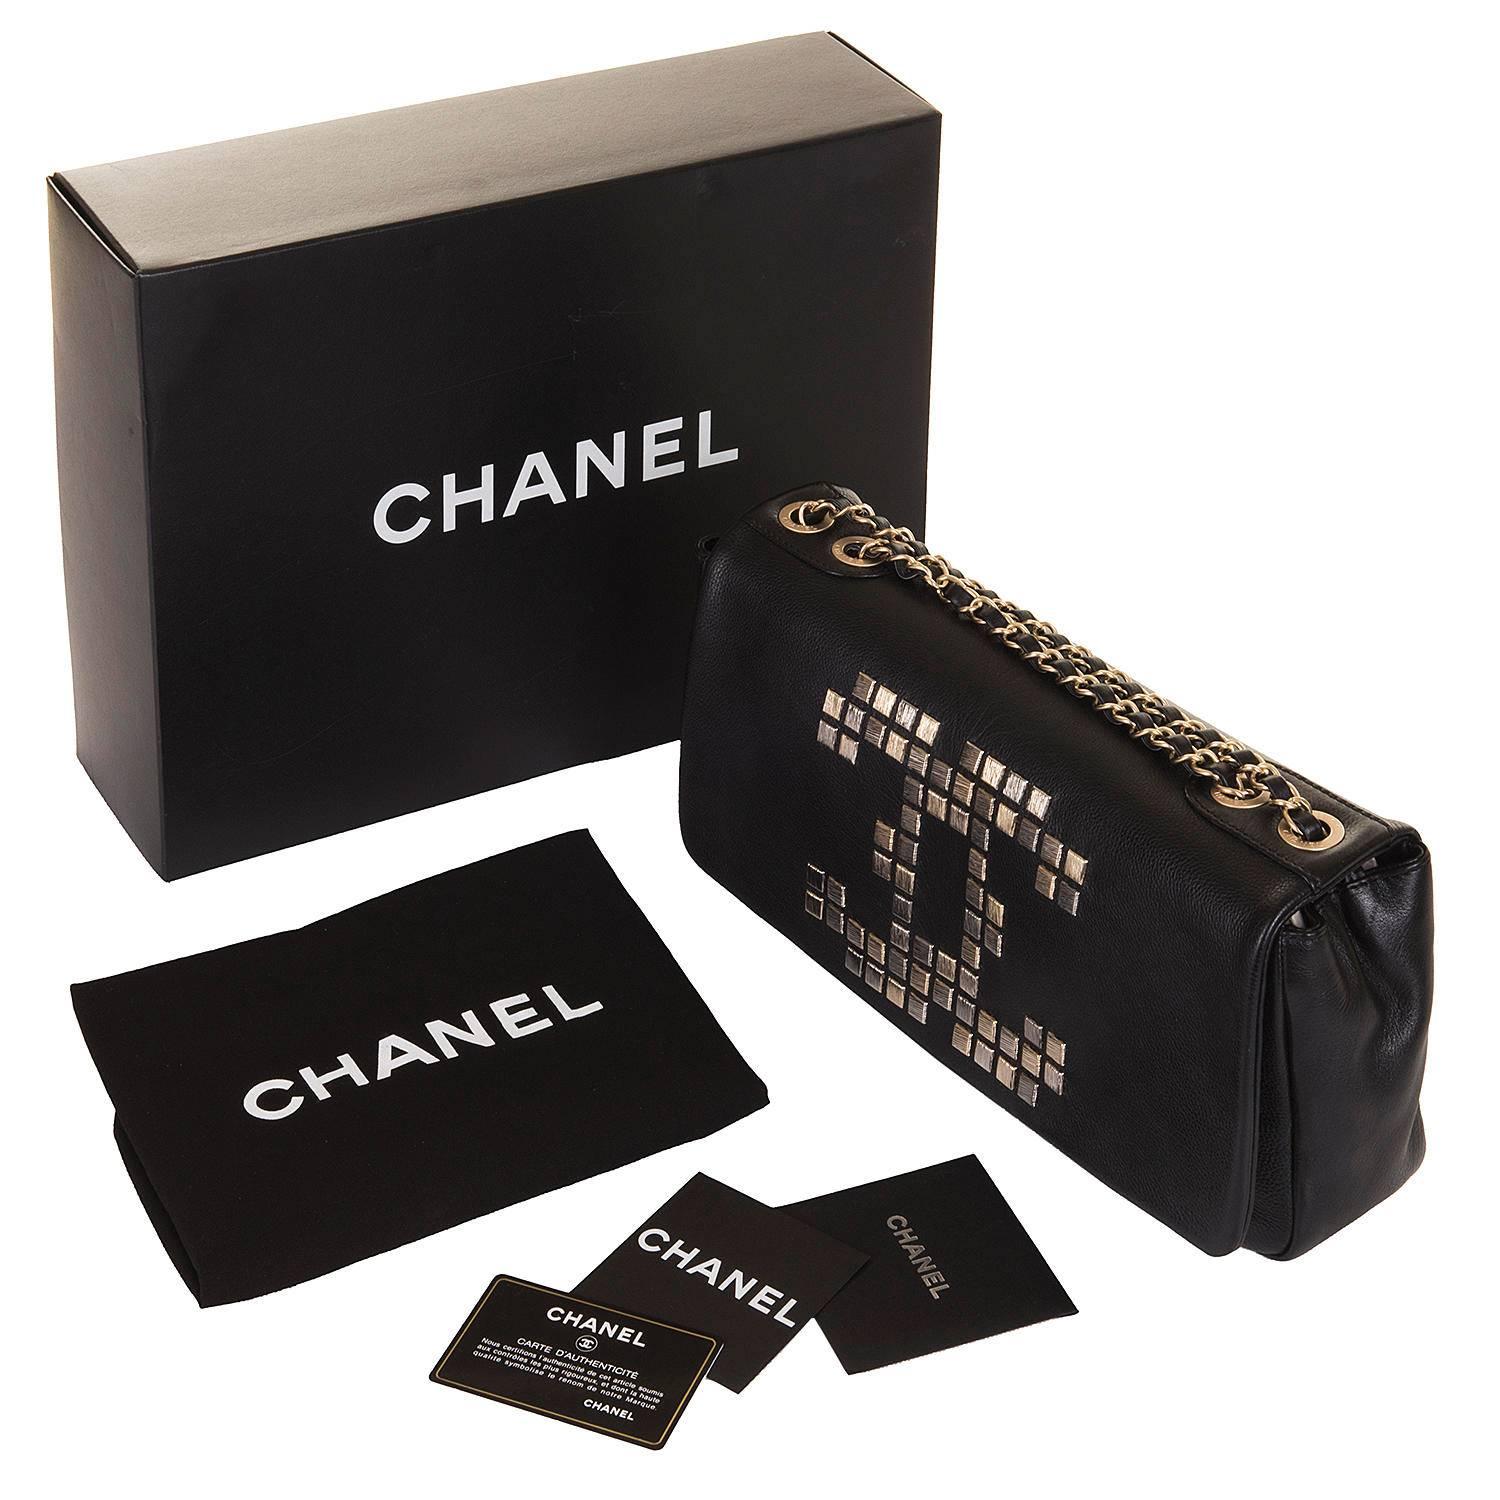 A rare & unusual Chanel jumbo-sized black lambskin leather, 'Mosaic', shoulder or clutch bag, featuring the iconic 'CC' logo to the front flap of the bag, formed from gold & silver engraved metal squares. The double handle strap can be